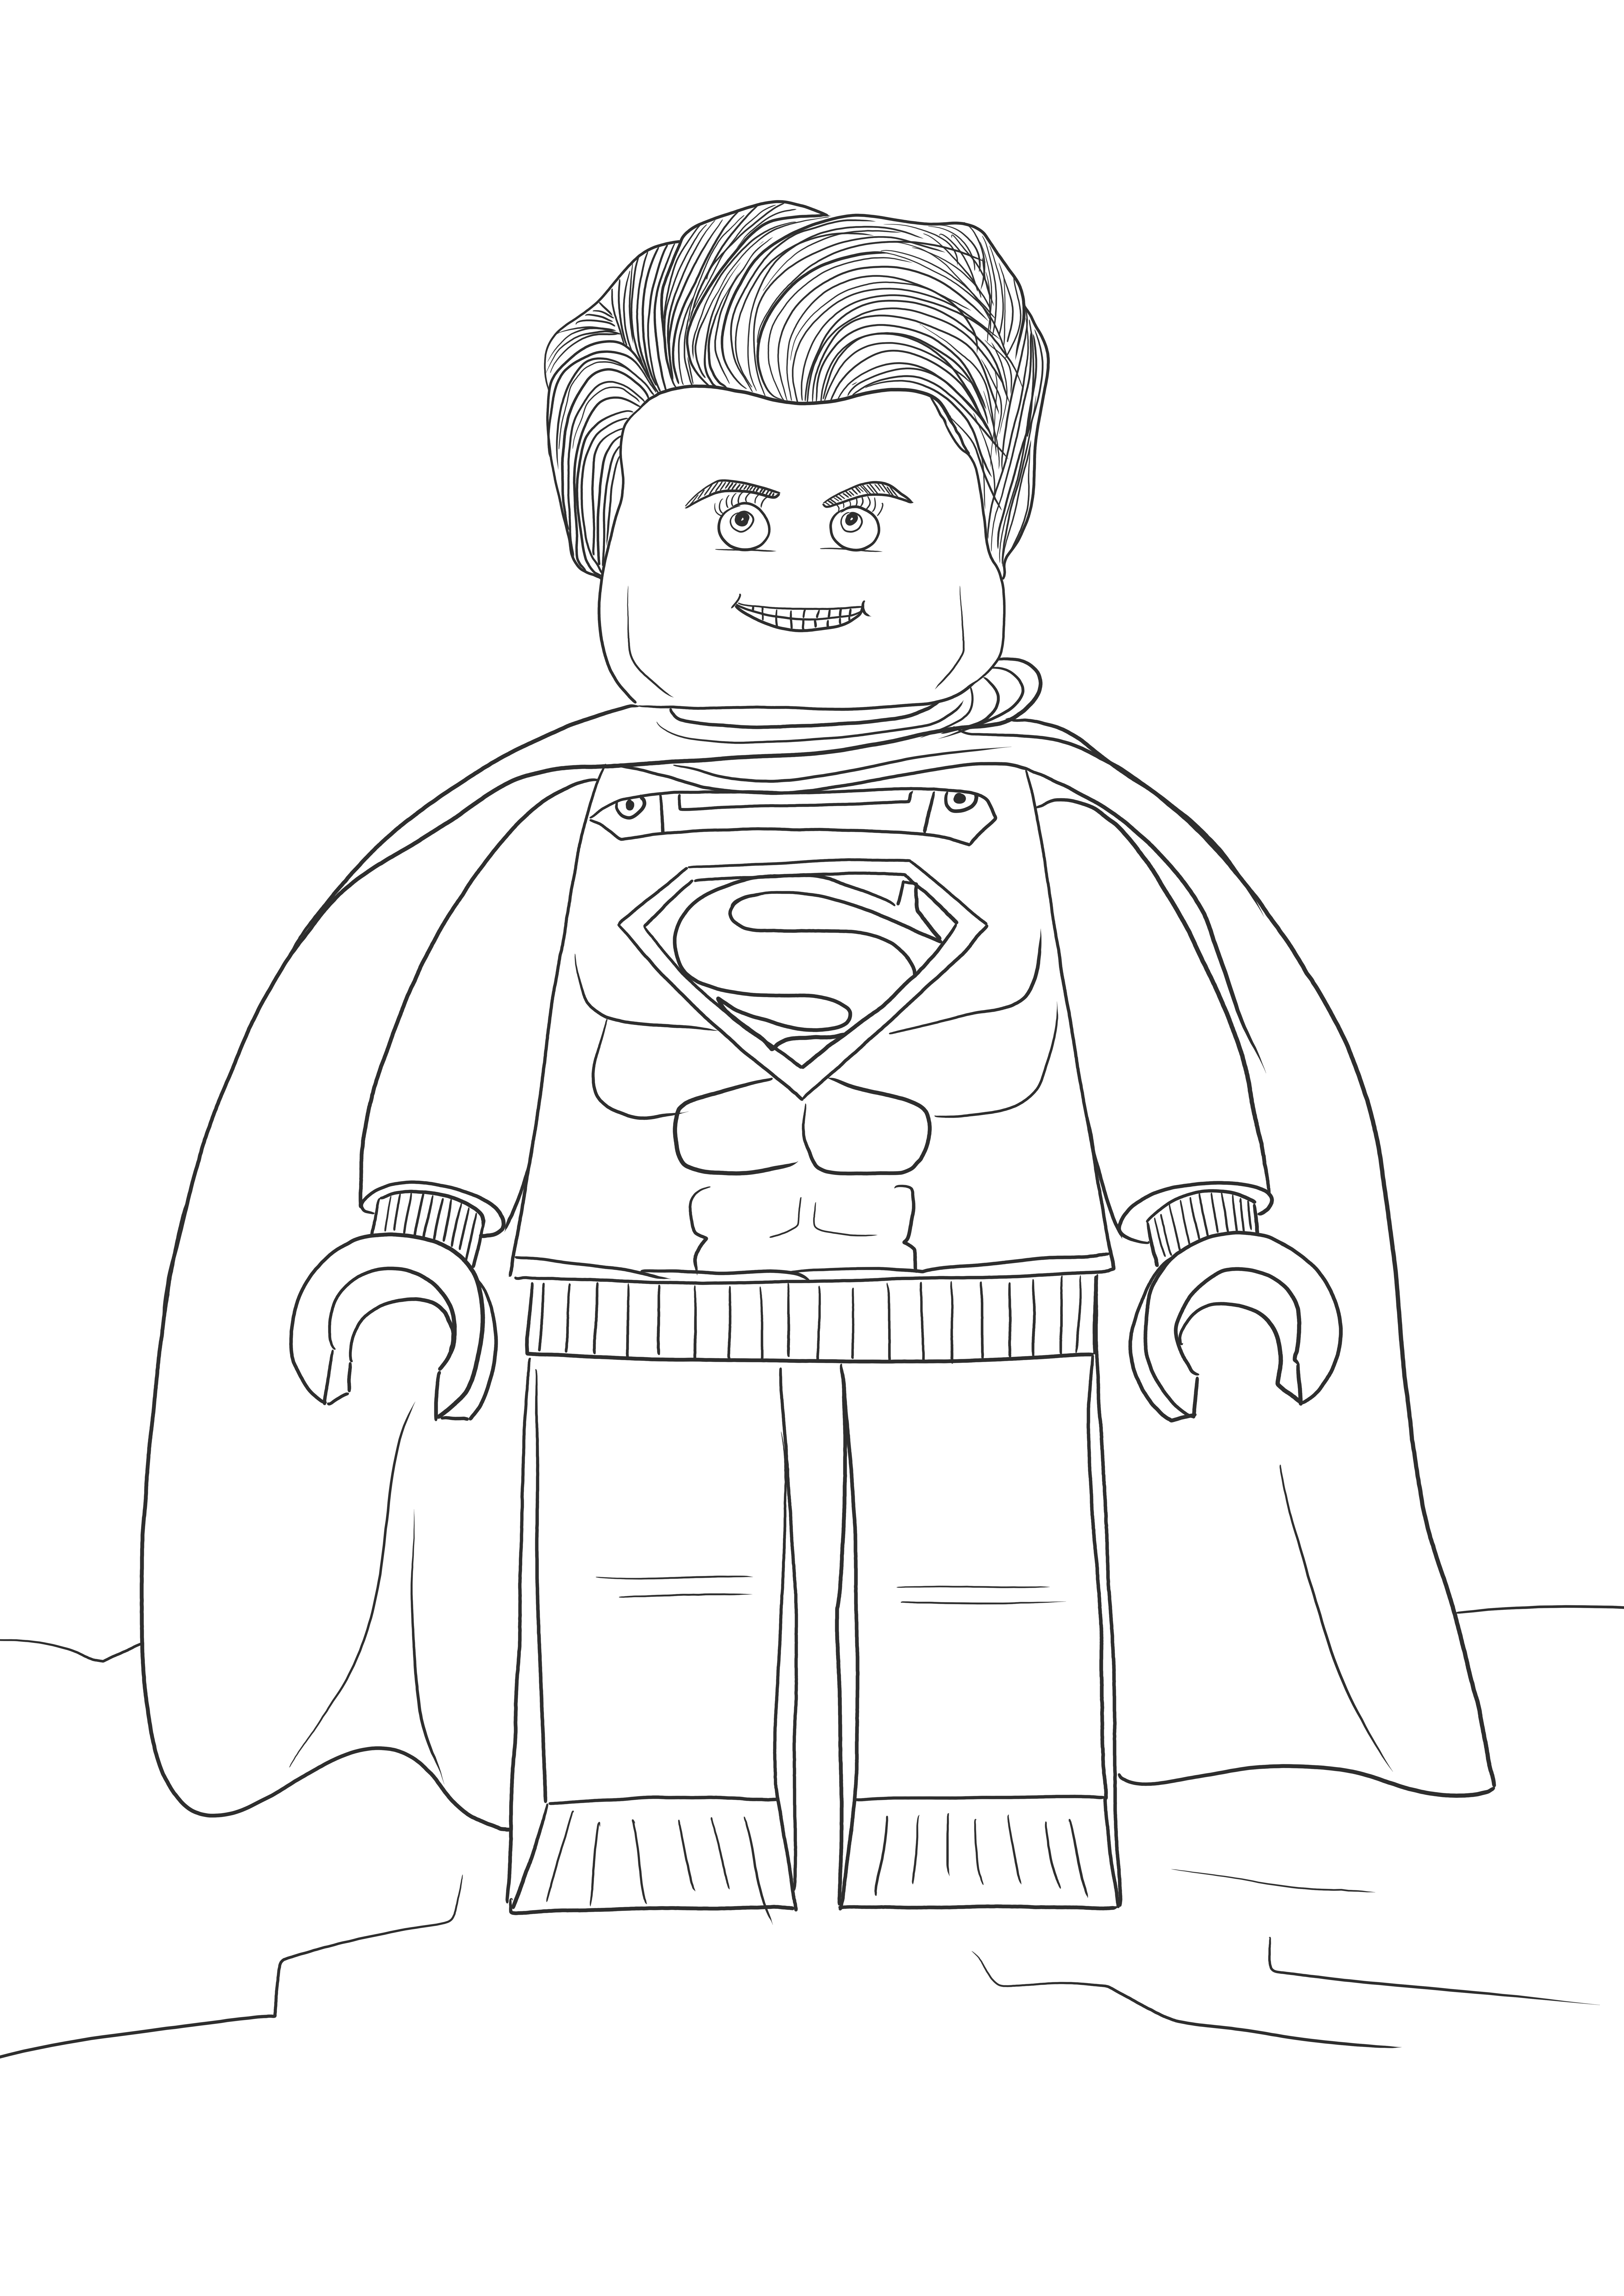 Lego Superman free to print or download images for kids to color